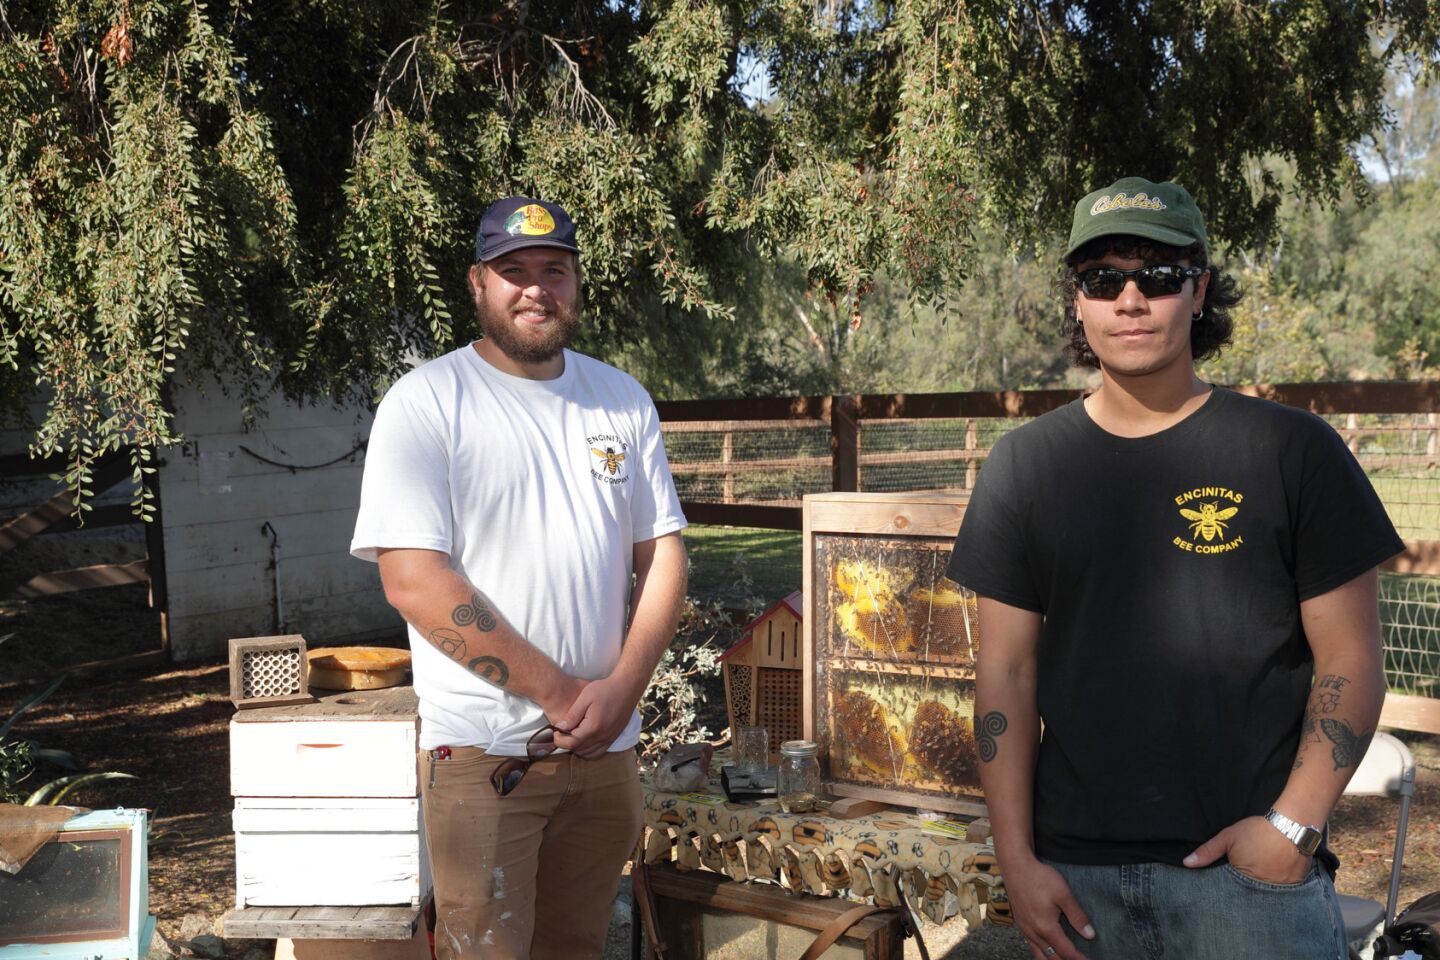 Emmett and Conor McDonald from the Encinitas Bee Company